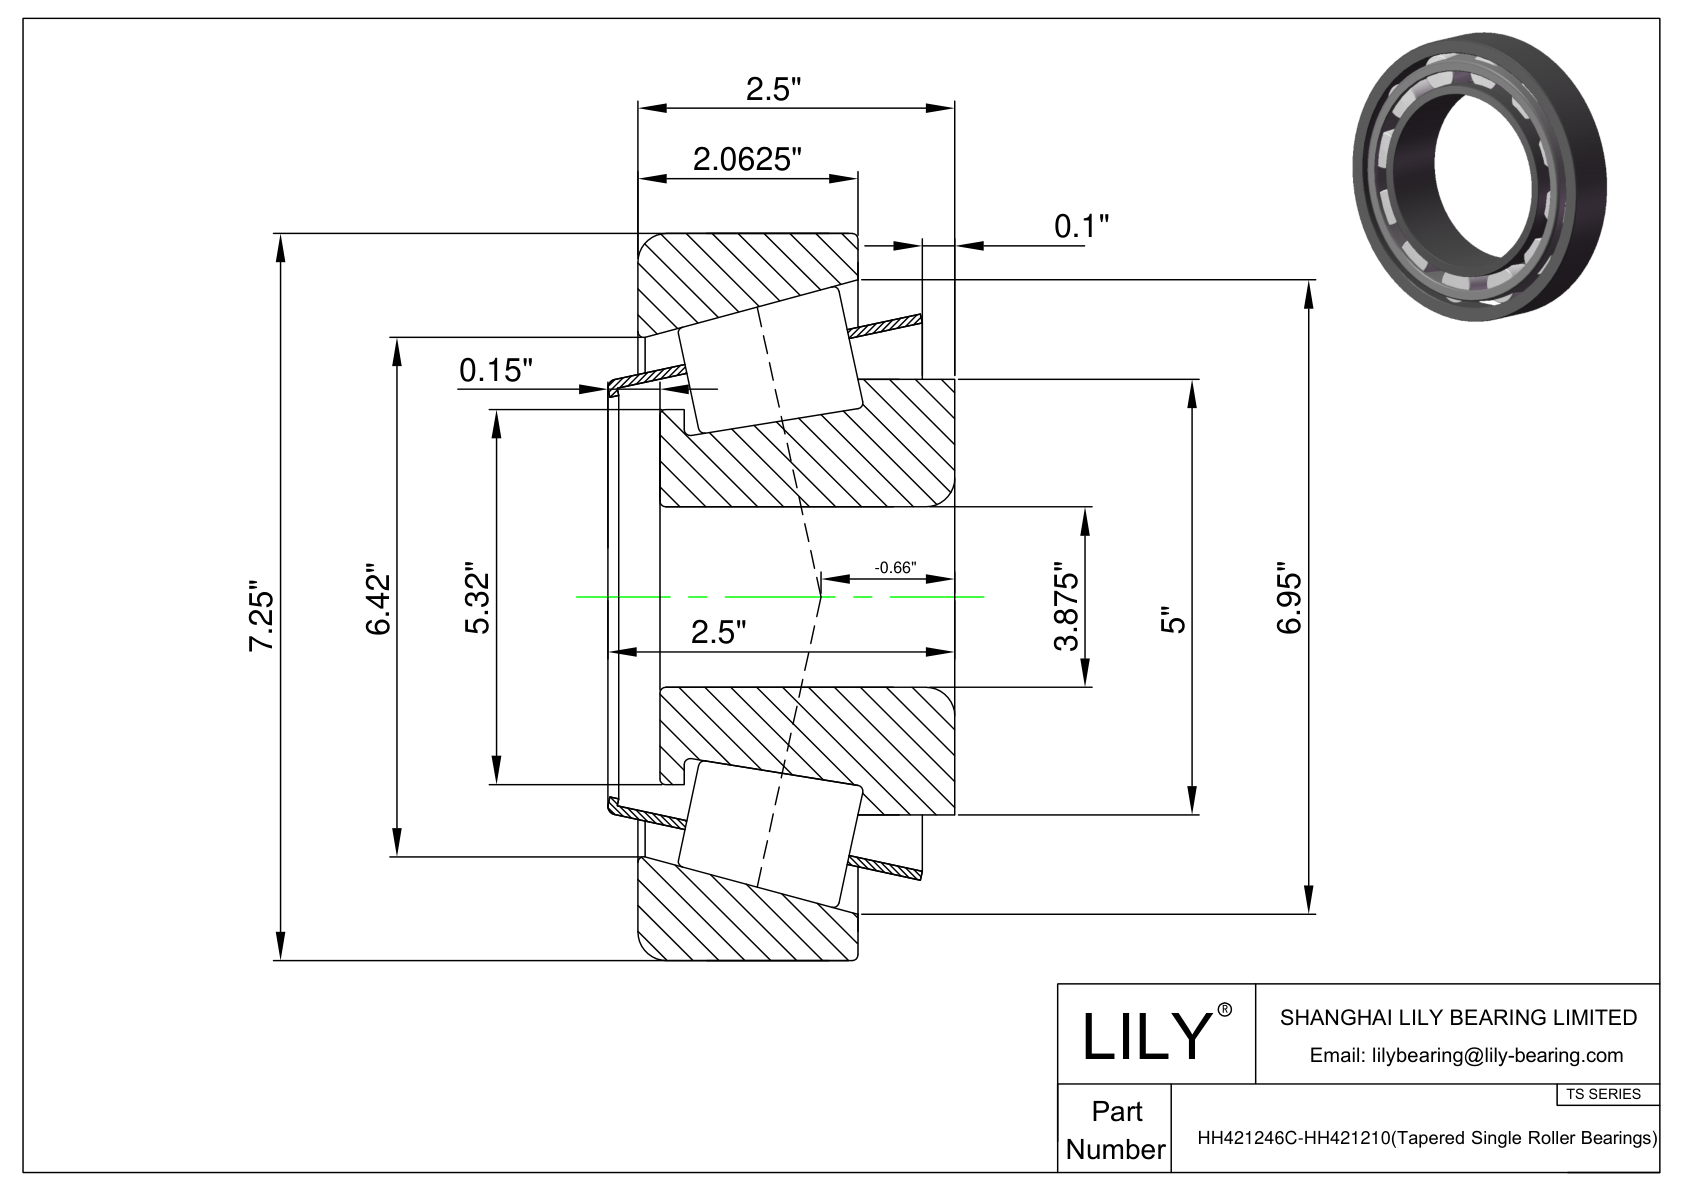 HH421246C-HH421210 TS (Tapered Single Roller Bearings) (Imperial) cad drawing